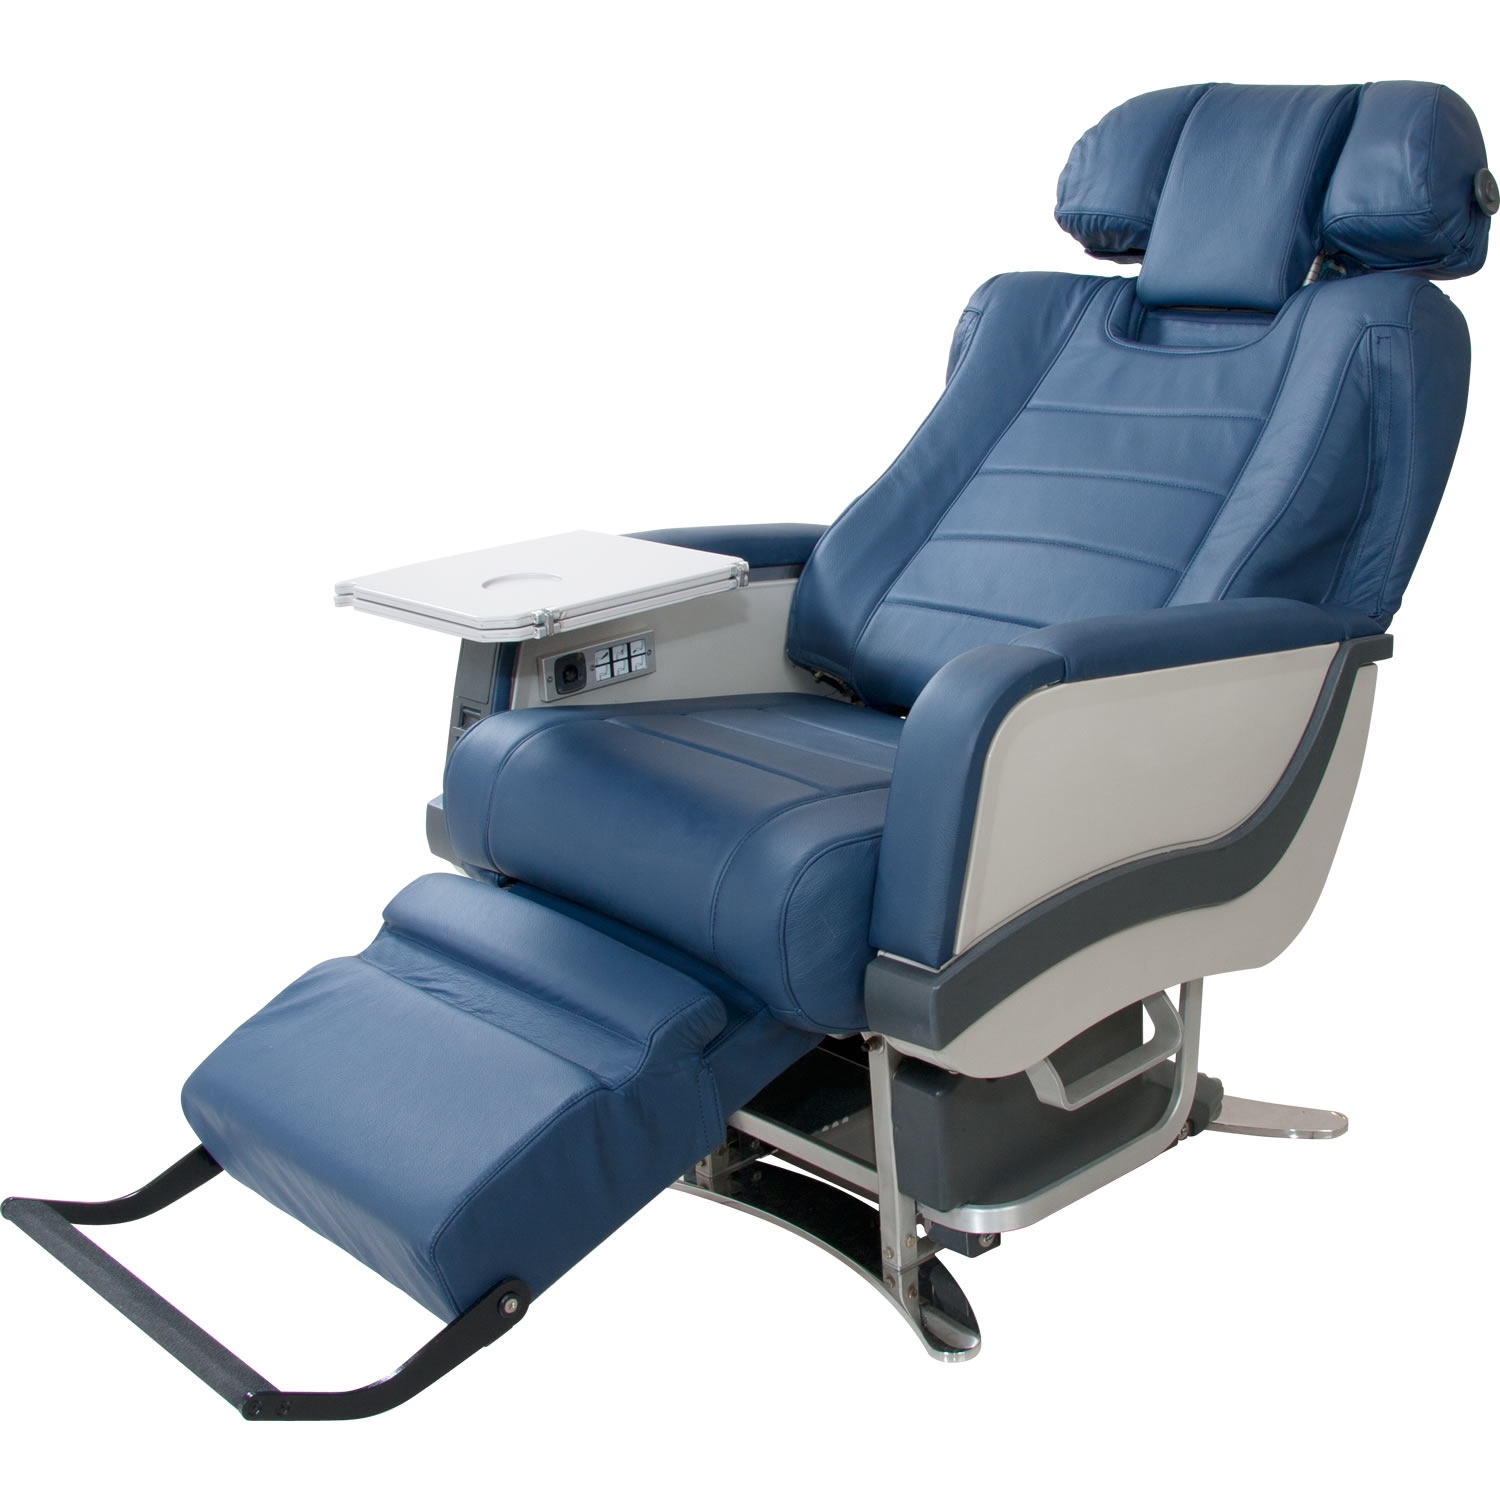 Skyline Airbus 340 First Class Seat